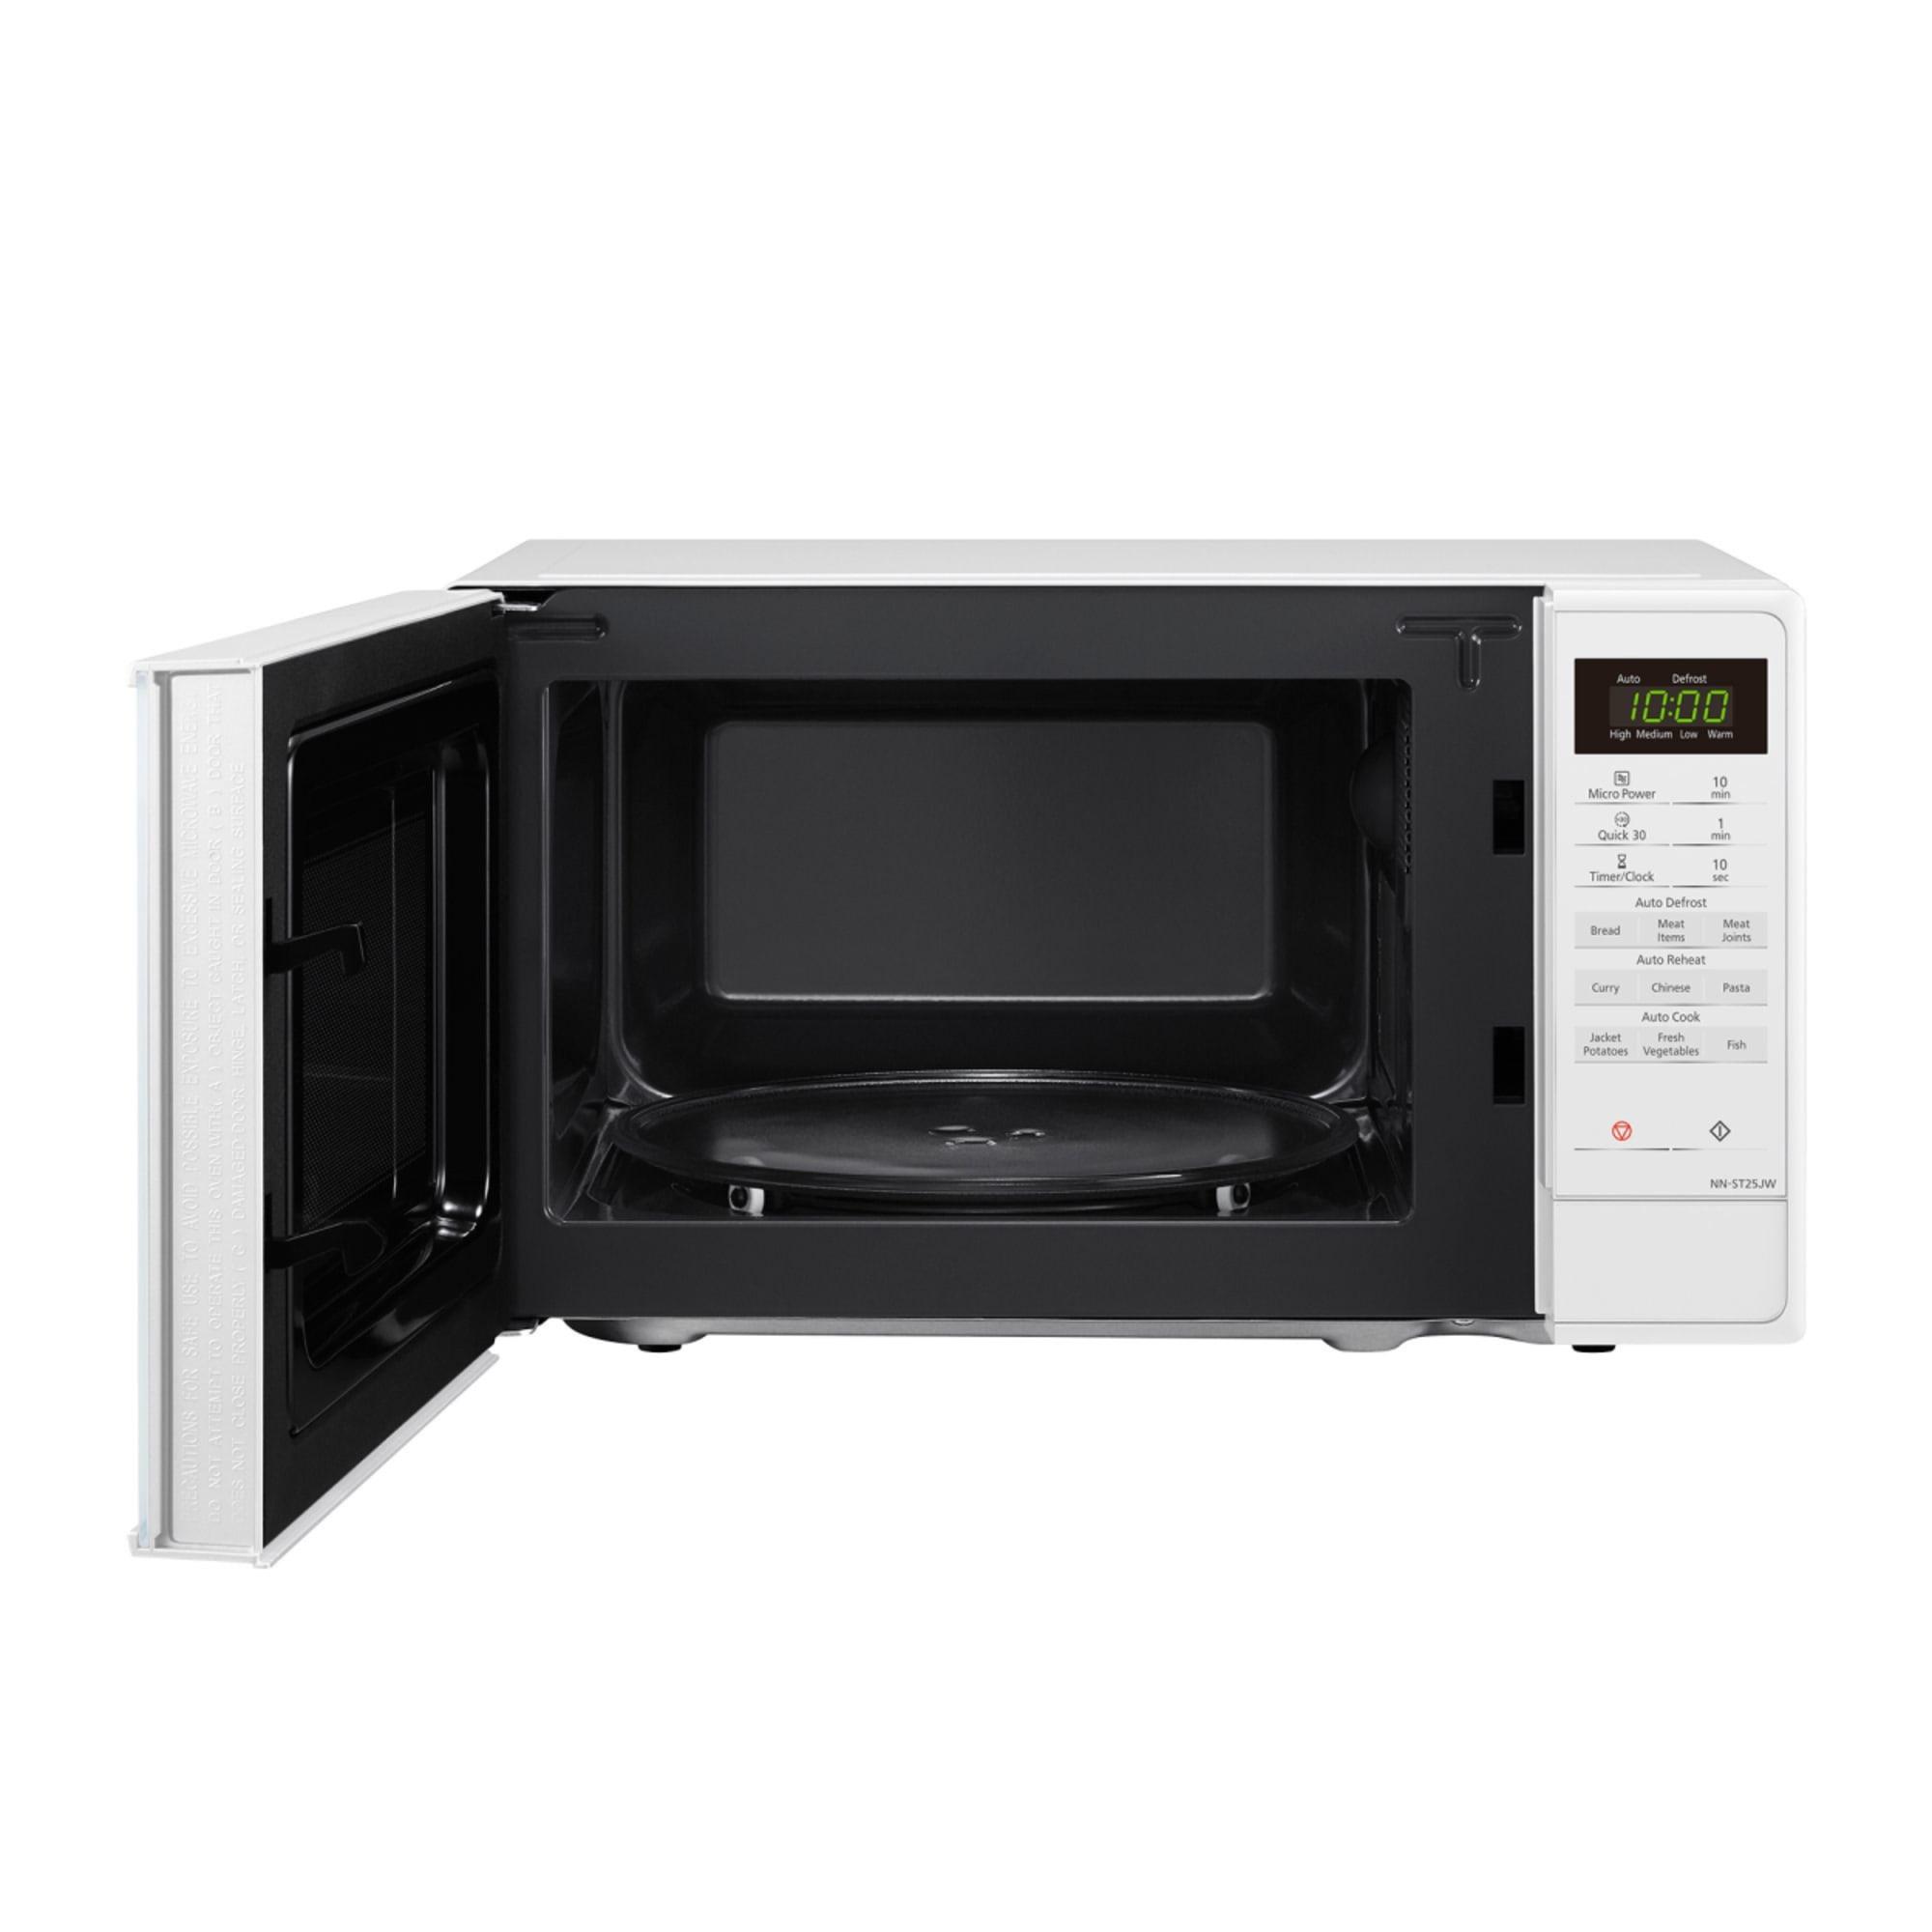 Panasonic Defrost Microwave Oven 20L White Image 4